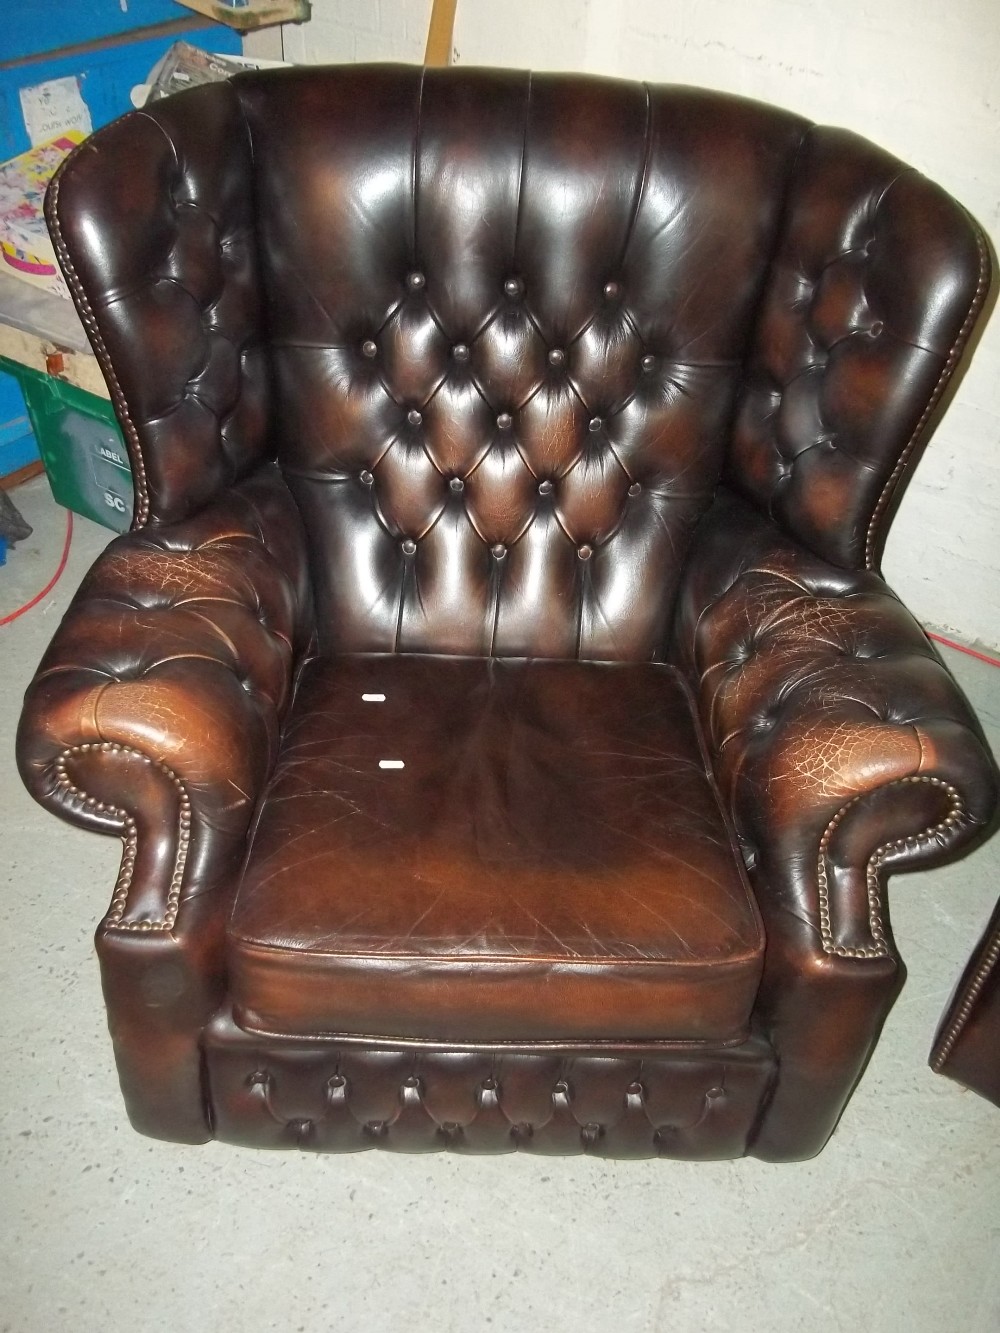 A BROWN LEATHER THREE SEATER CHESTERFIELD SOFA AND WING BACKED CHAIR (TWO PIECE SUITE) - Image 3 of 3